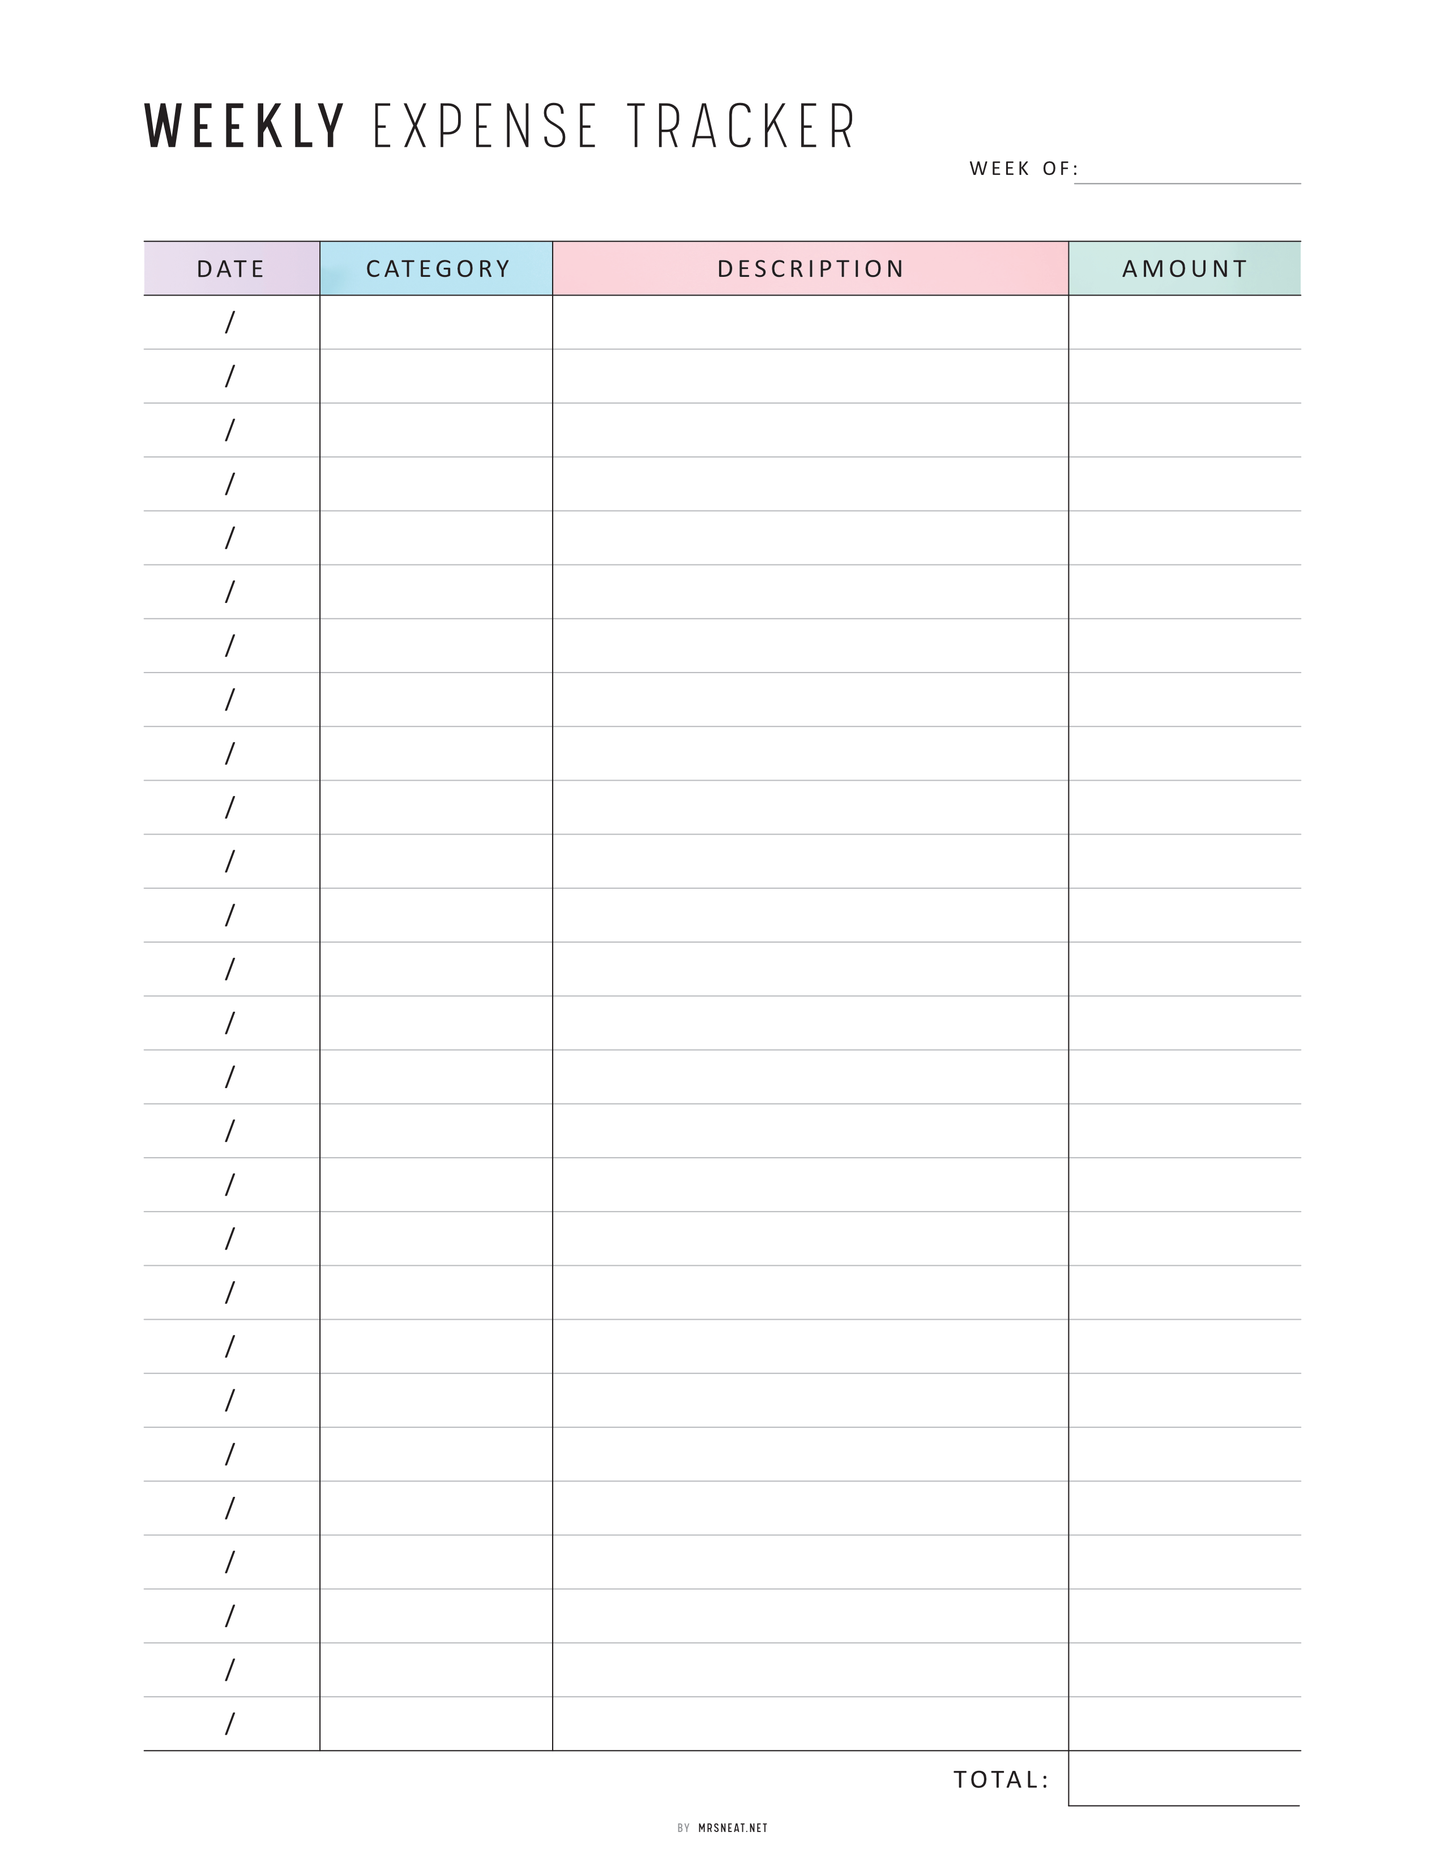 Weekly Expense Tracker, Printable, A4, A5, Half Letter, Letter, PDF, Digital Planner, 2 Colors, Instant Download